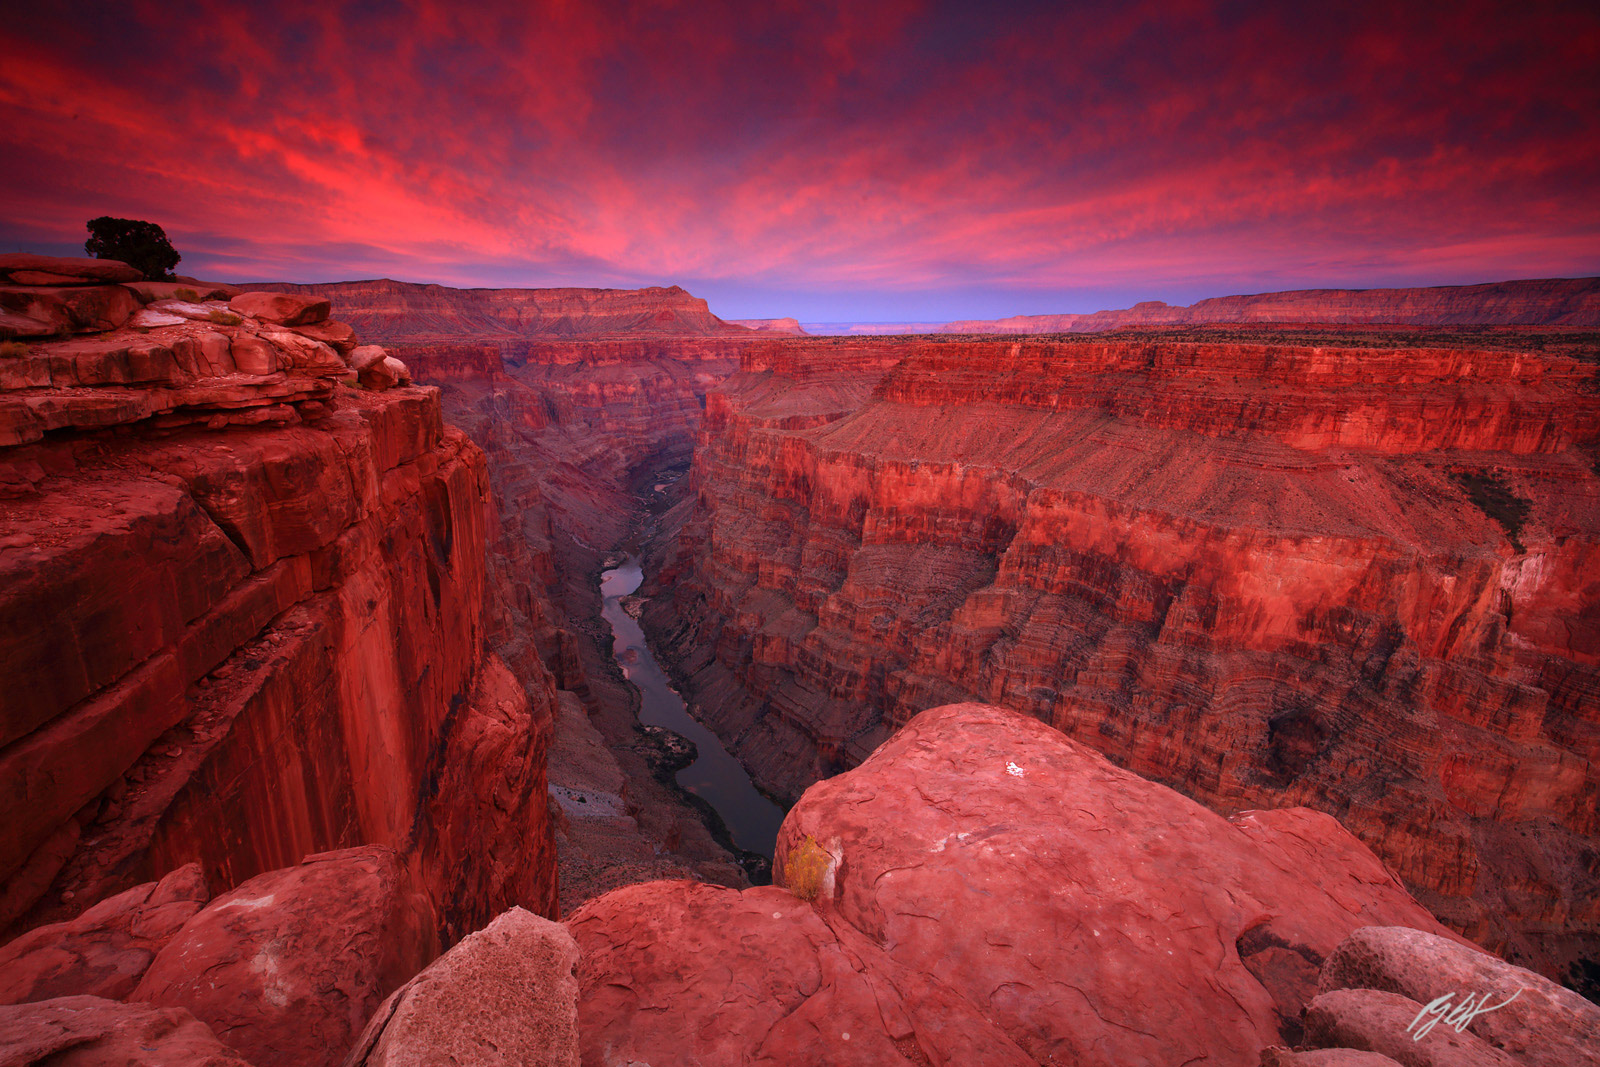 Sunset over the Grand Canyon from Toroweap Overlook in the backcountry of Grand Canyon National Park in Arizona